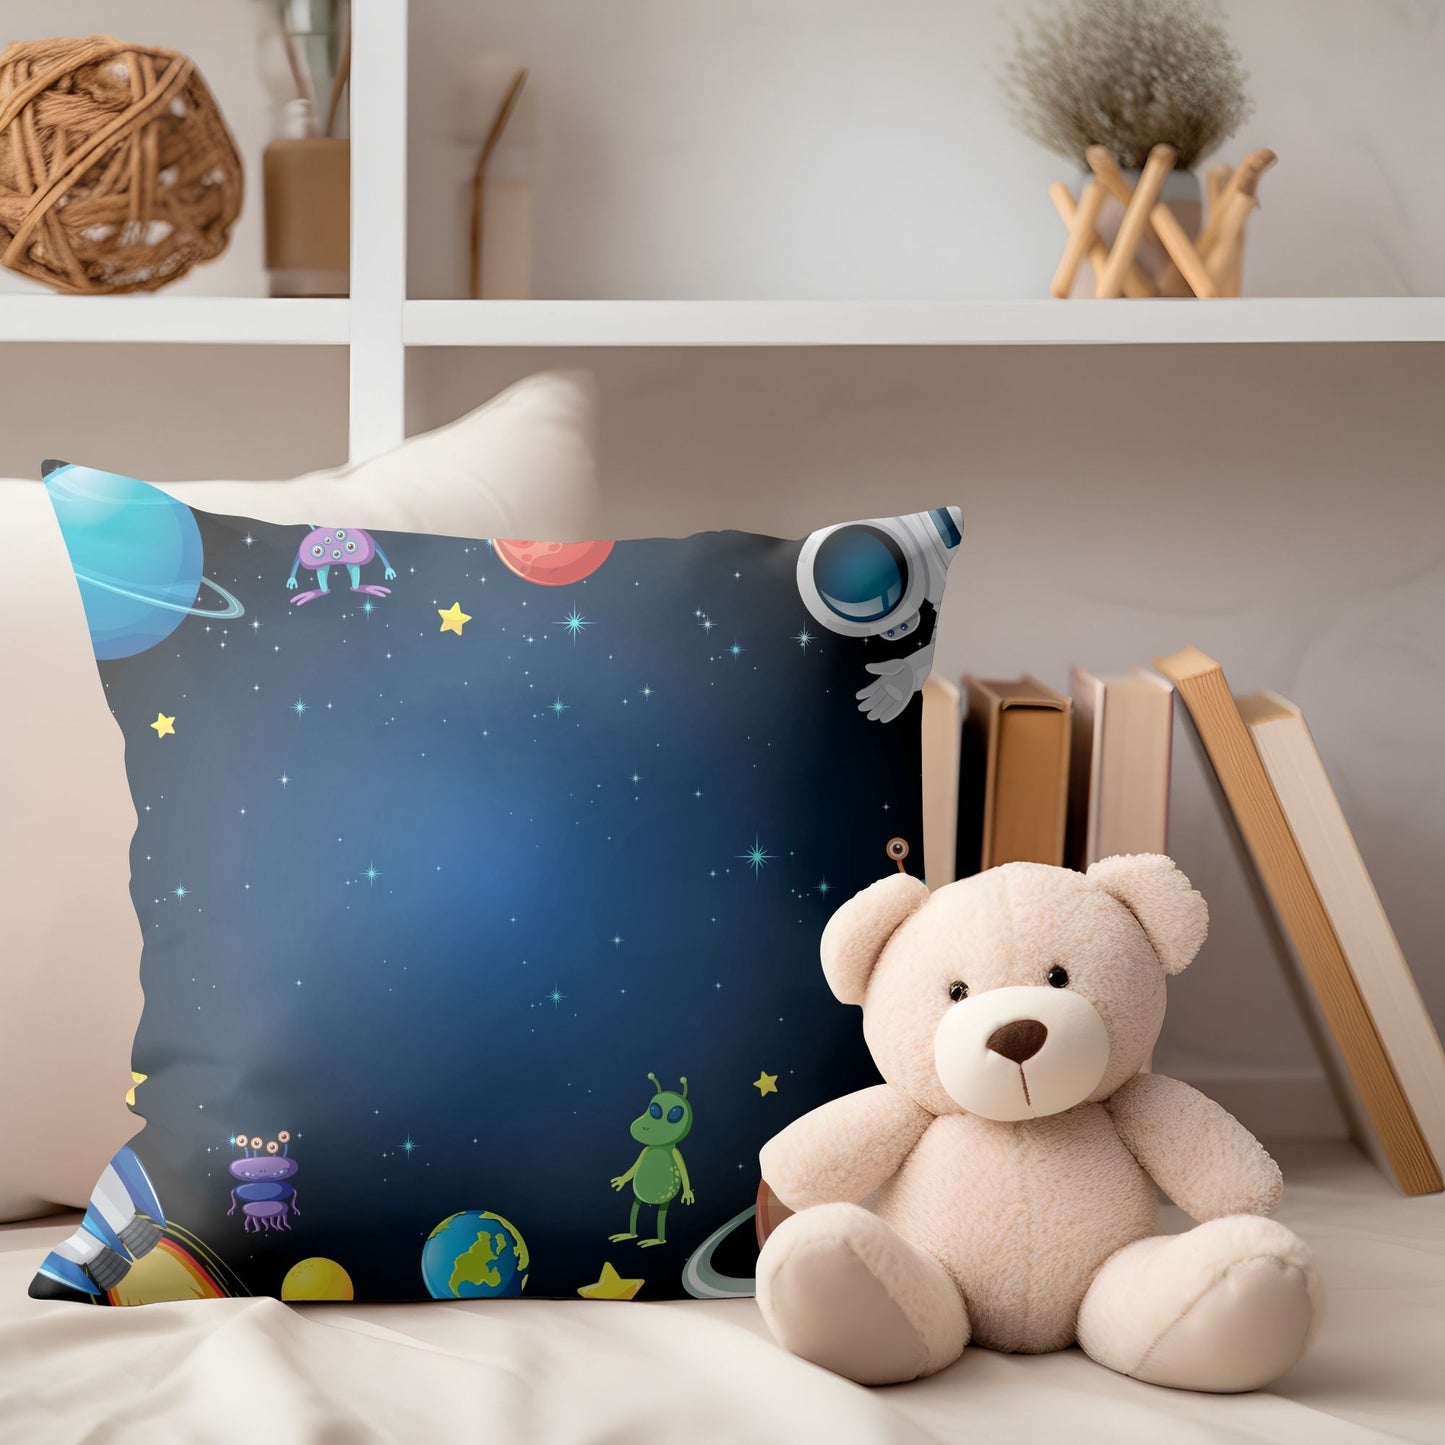 Whimsical kids pillow showcasing a cute aliens design for imaginative play.